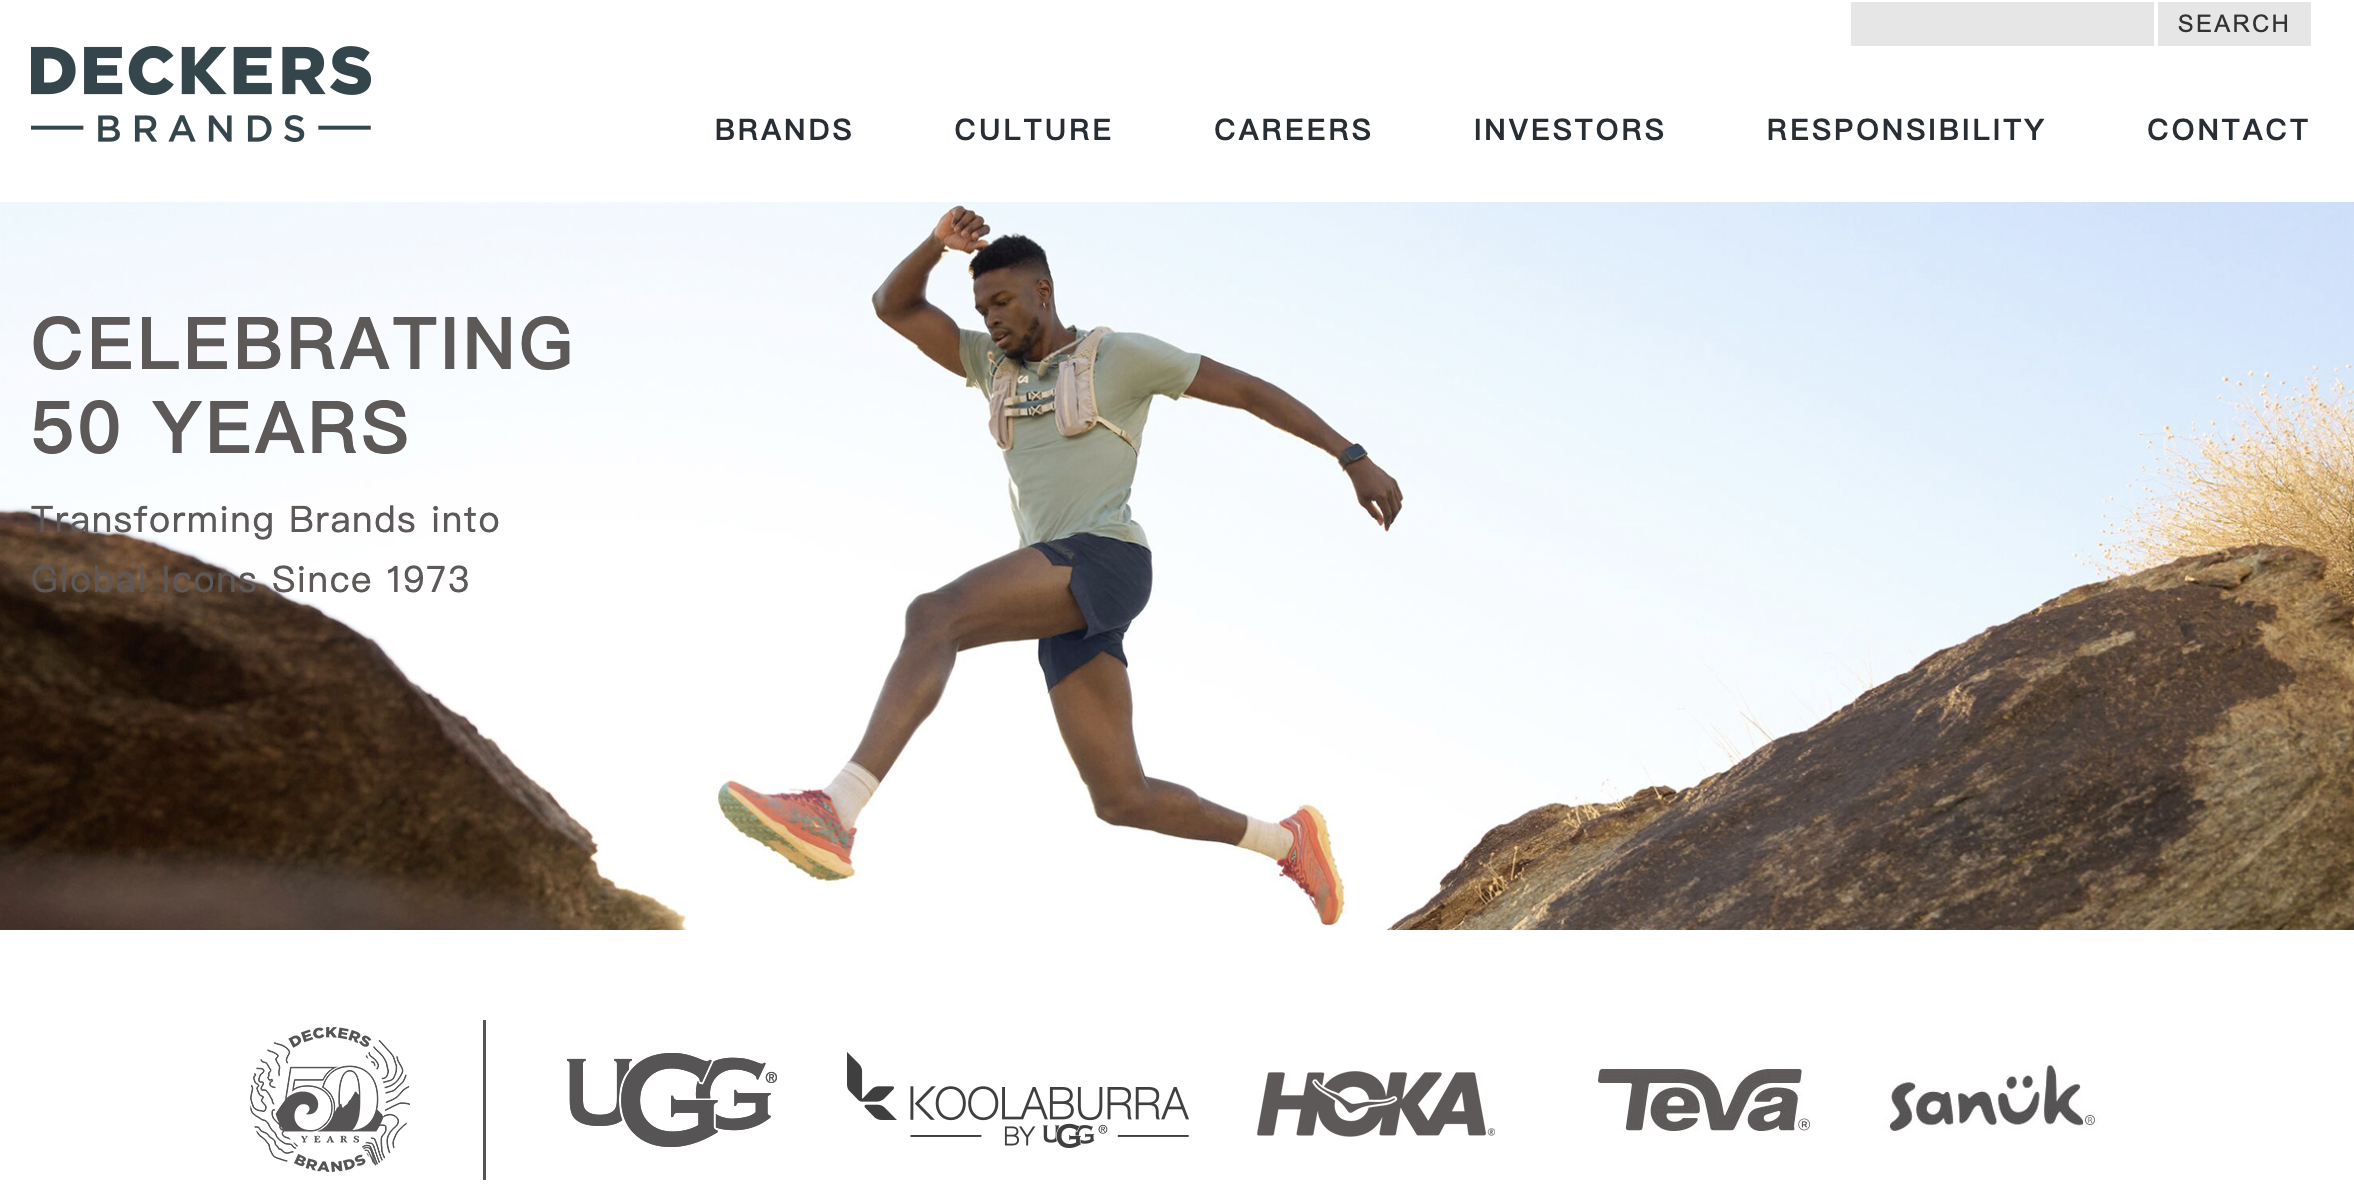 Hoka Sales up about 30%, Deckers Brands Gets off to a Strong Start to FY 2024 and Raises Guidance